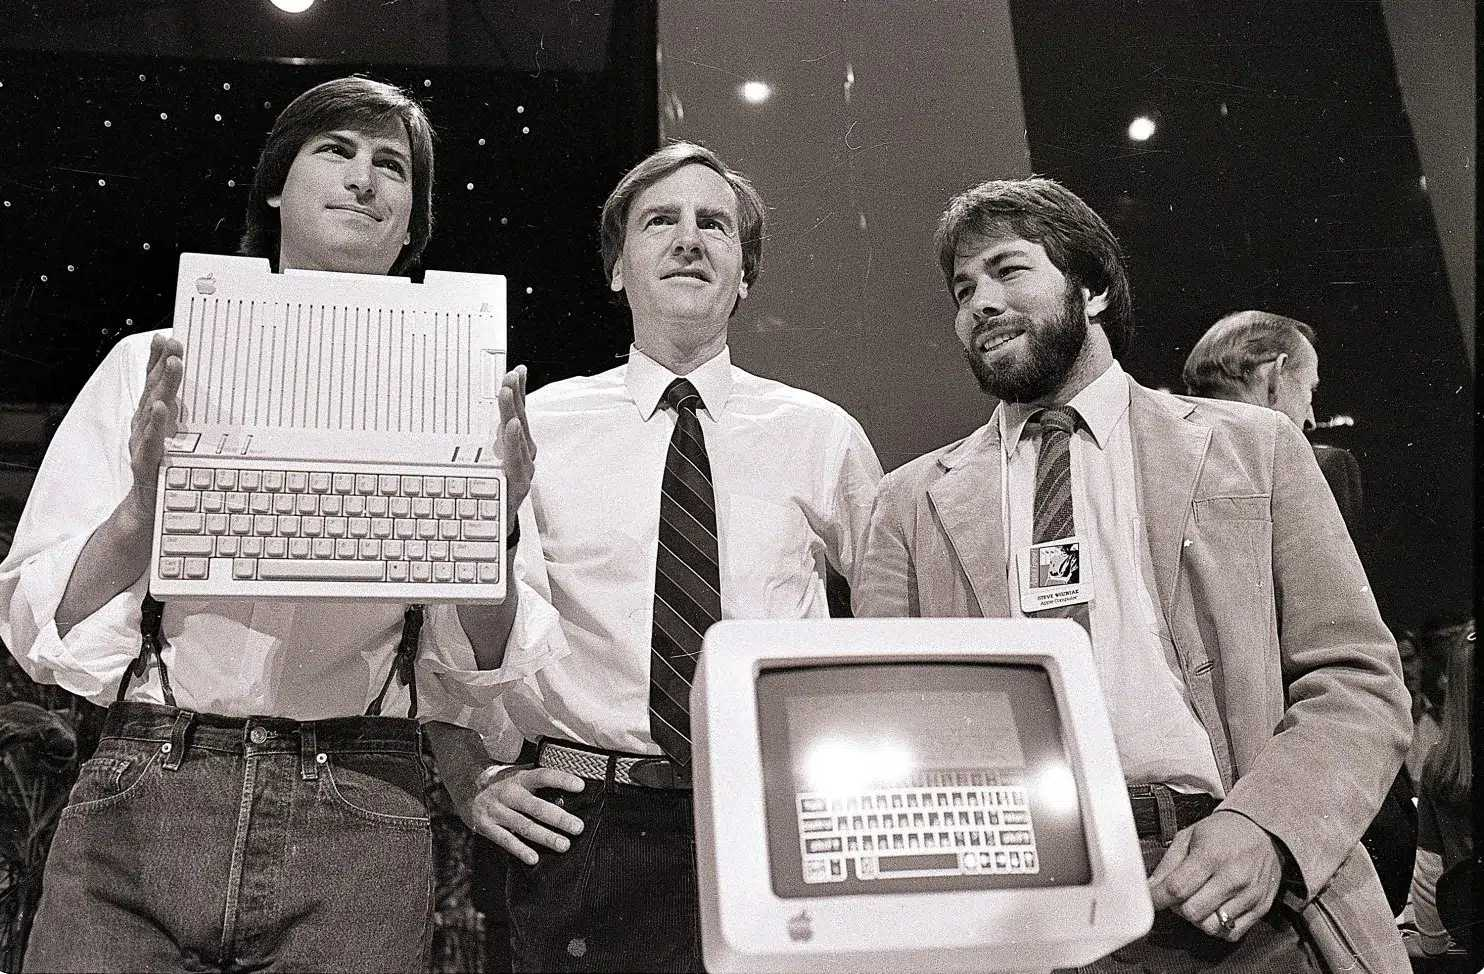 Steve Jobs, left, chairman of Apple Computers, John Sculley, centre, president and CEO, and Steve Wozniak, co-founder of Apple, unveil the new Apple IIc computer in San Francisco, April 24, 1984. (SAL VEDER/ASSOCIATED PRESS)